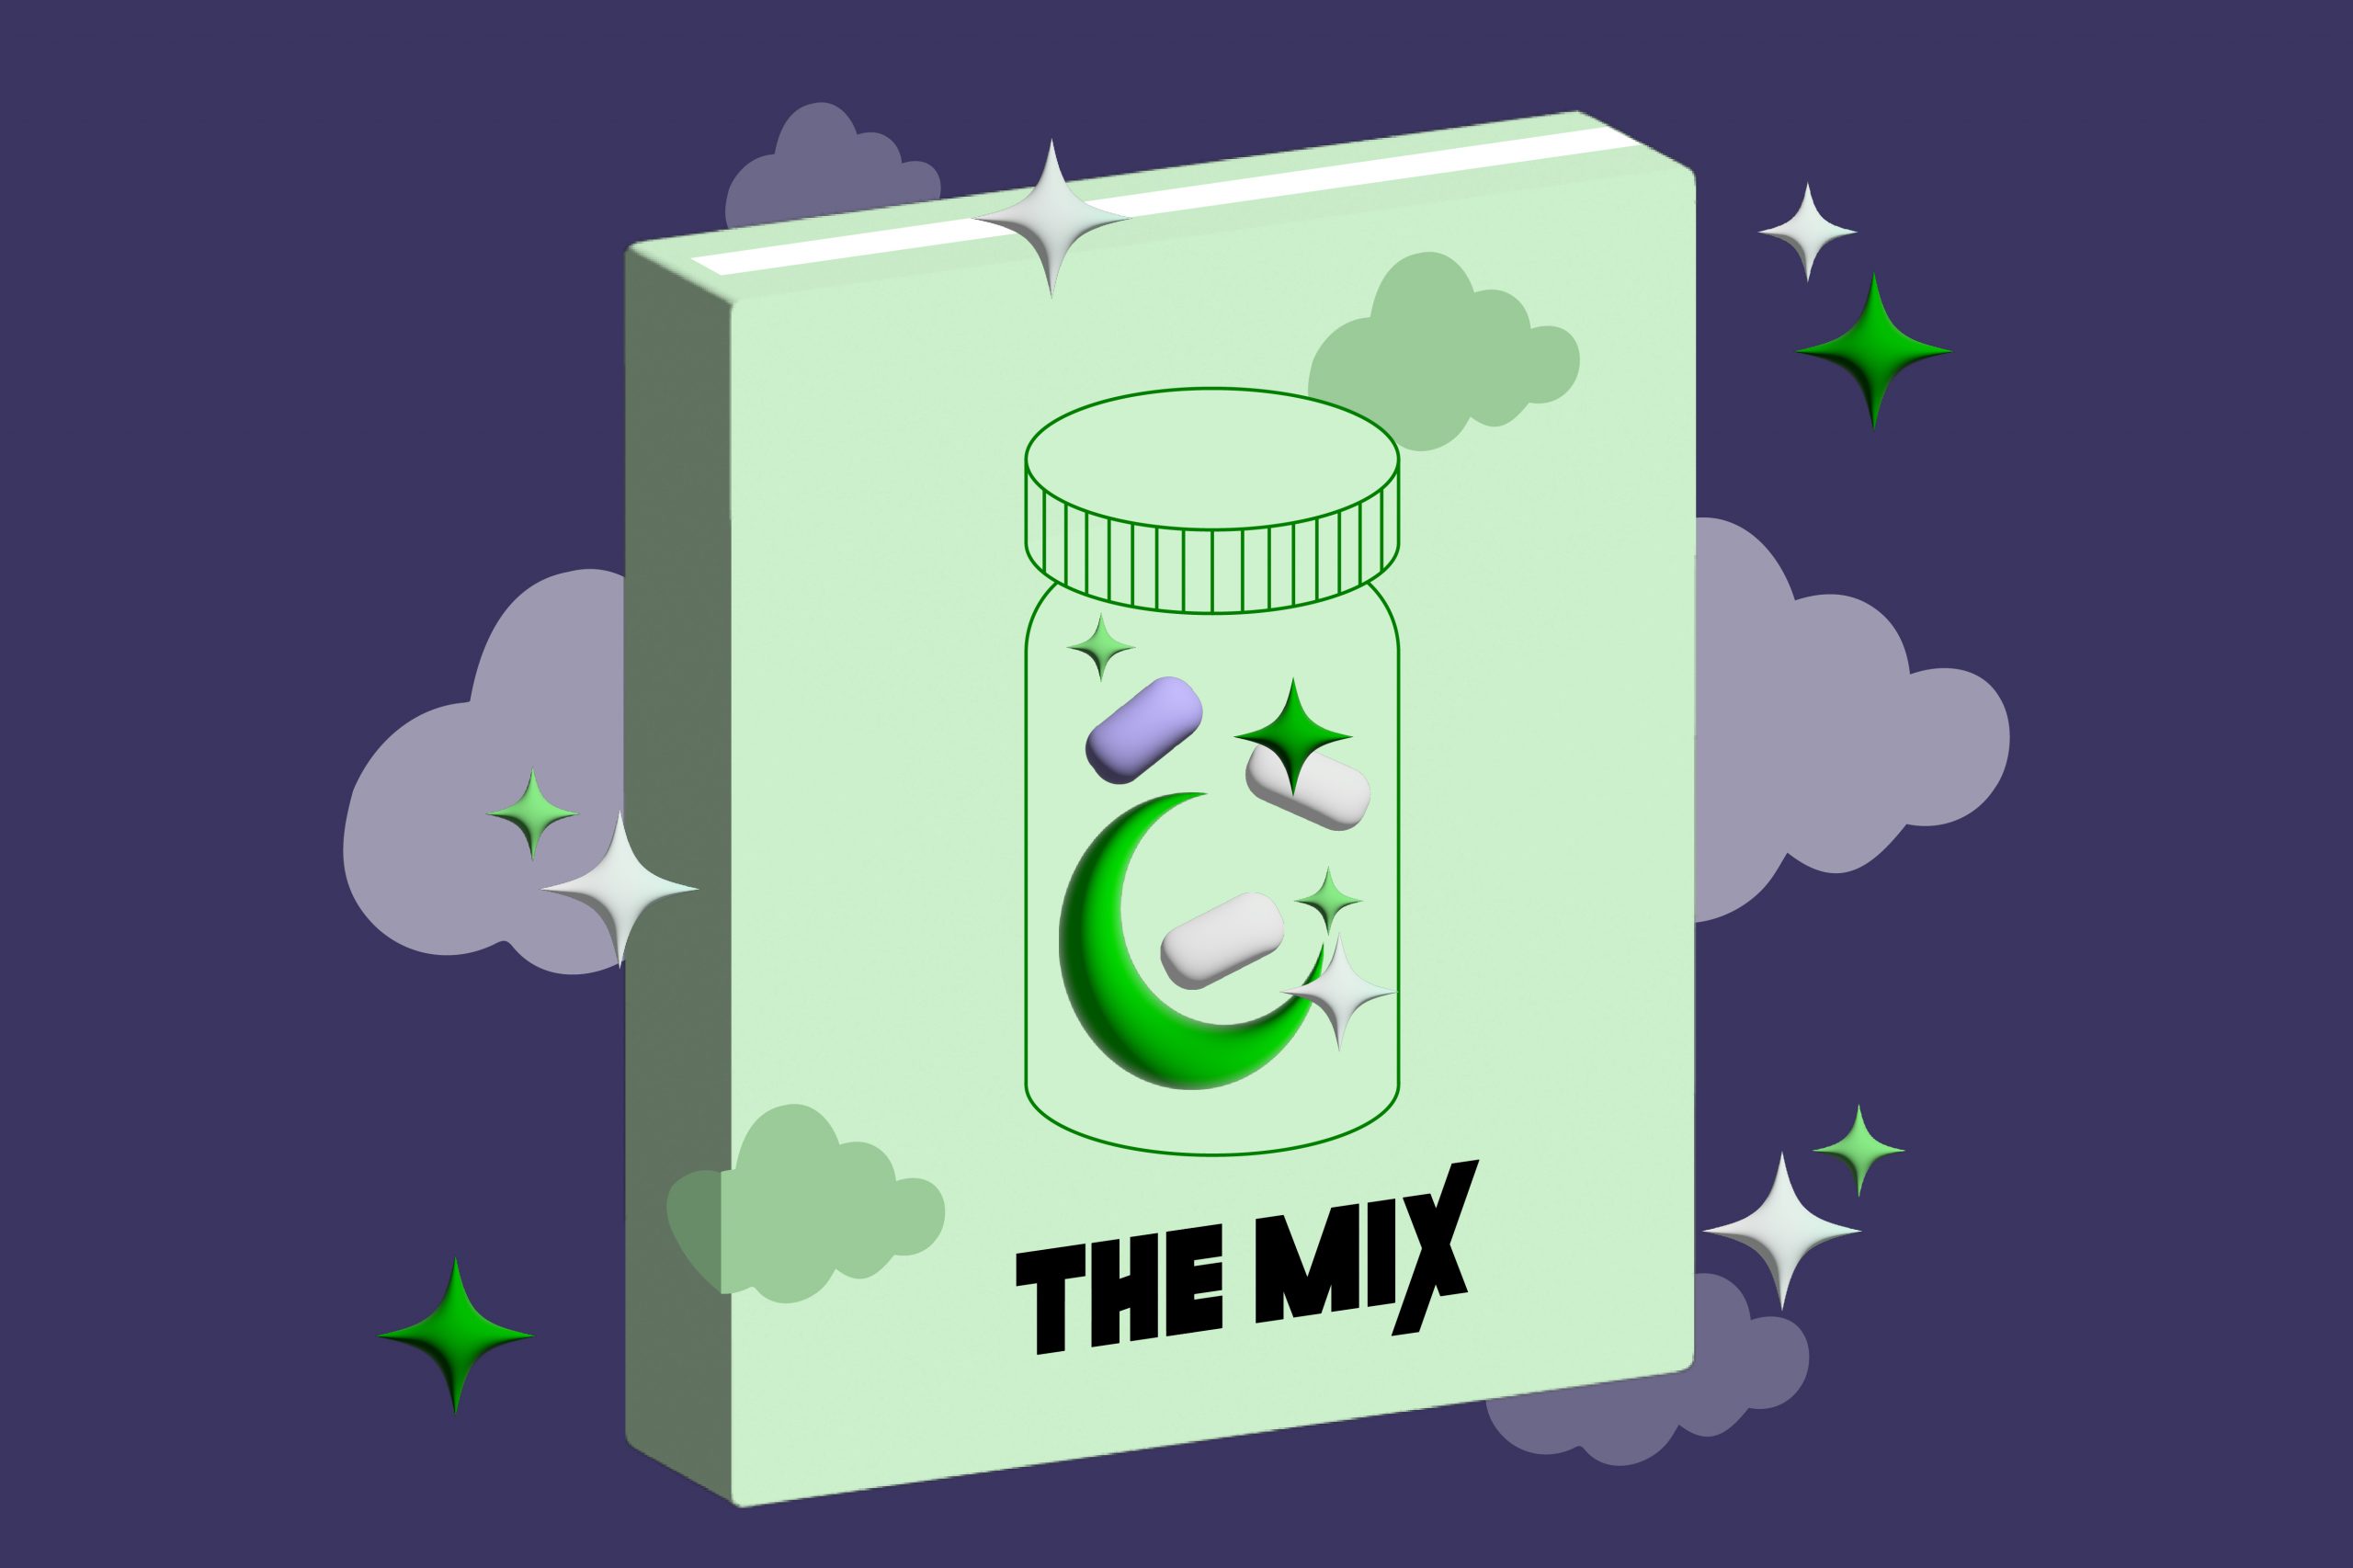 Graphic shows a book against a background of a night sky. The cover of the book shows a jar with pills, moons and stars. The images represent a guide to sleeping pills.